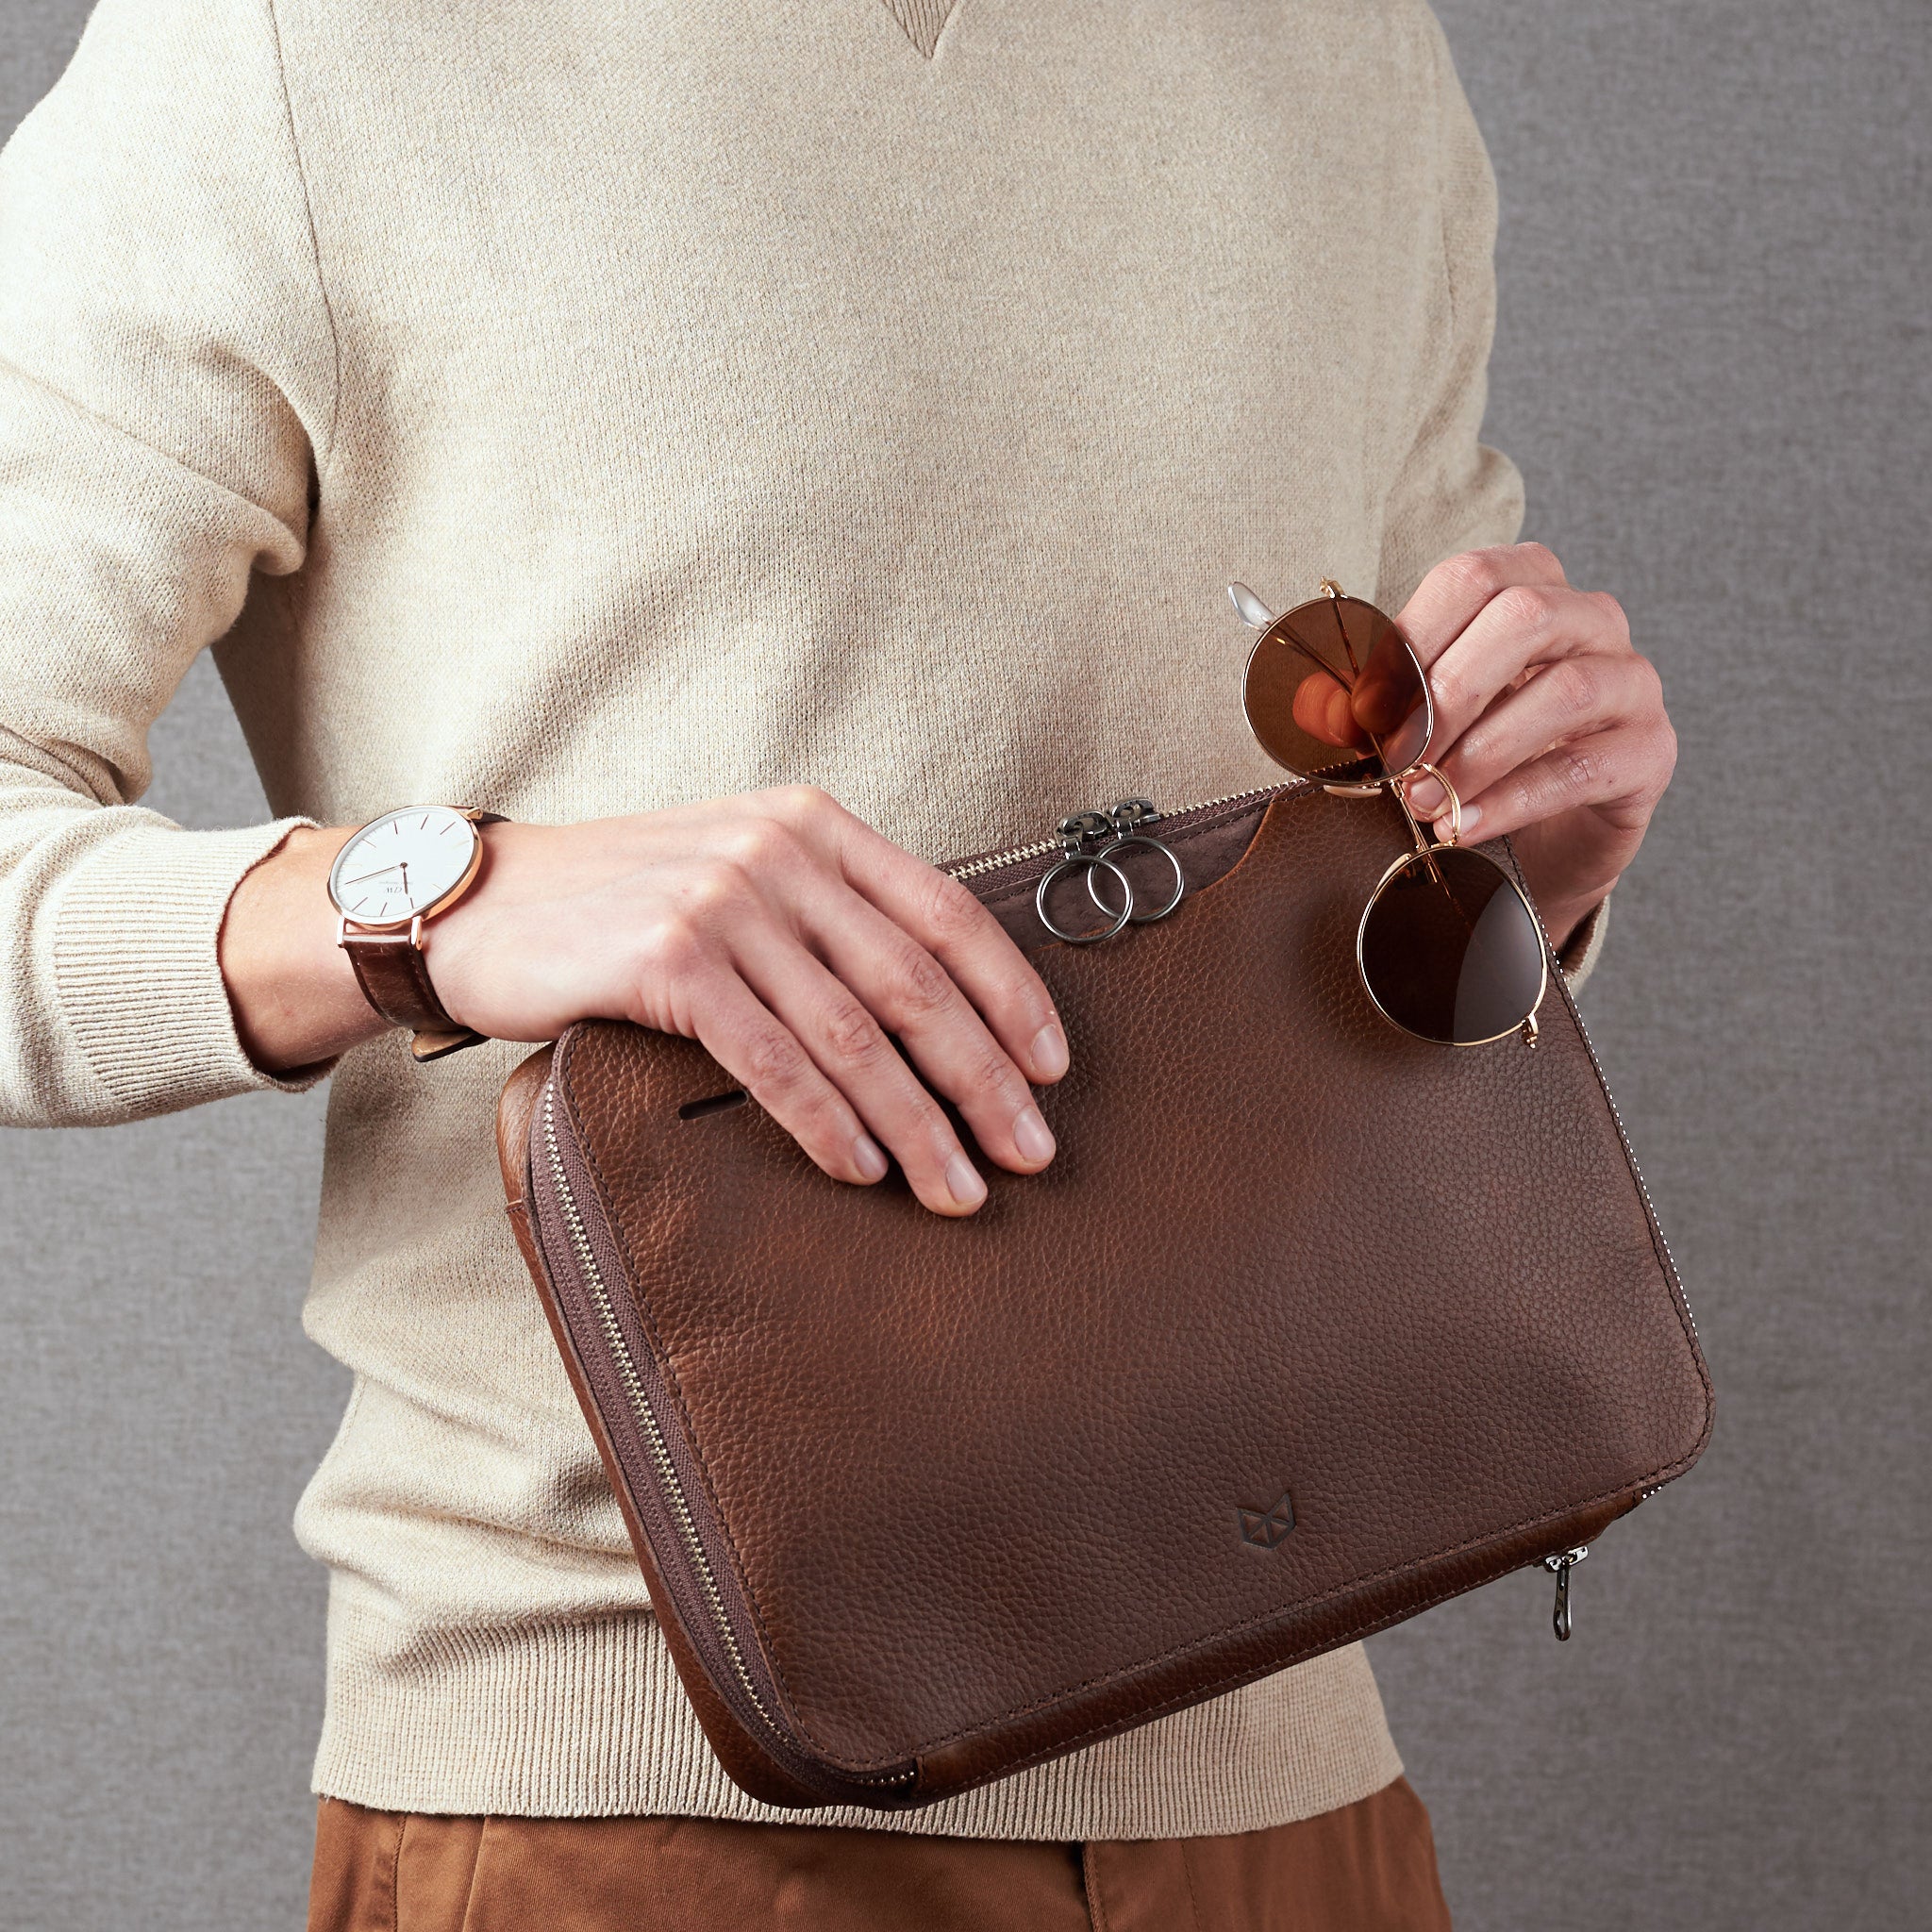 Small Gear Pouch 2 · Brown by Capra Leather